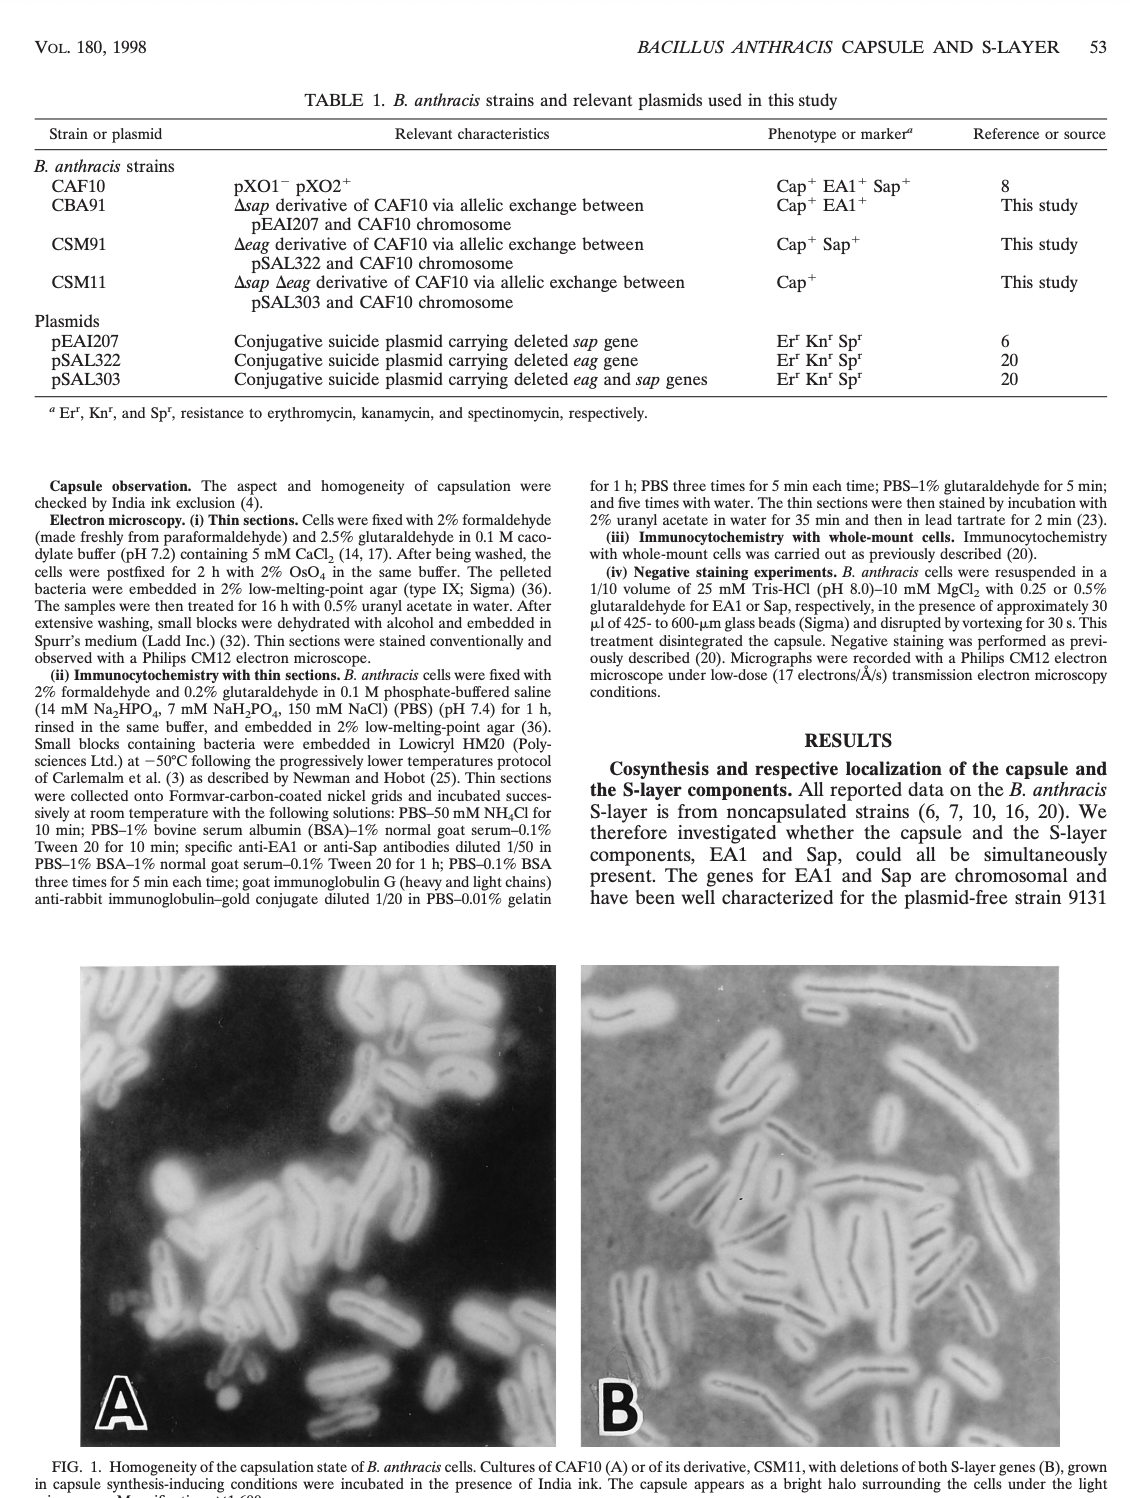 VOL. 180, 1998
Strain or plasmid
B. anthracis strains
CAF10
CBA91
CSM91
CSM11
Plasmids
PEAI207
PSAL322
PSAL303
TABLE 1. B. anthracis strains and relevant plasmids used in this study
Relevant characteristics
pX01 PXO2+
Asap derivative of CAF10 via allelic exchange between
PEAI207 and CAF10 chromosome
Aeag derivative of CAF10 via allelic exchange between
pSAL322 and CAF10 chromosome
Asap Aeag derivative of CAF10 via allelic exchange between
pSAL303 and CAF10 chromosome
BACILLUS ANTHRACIS CAPSULE AND S-LAYER 53
Conjugative suicide plasmid carrying deleted sap gene
Conjugative suicide plasmid carrying deleted eag gene
Conjugative suicide plasmid carrying deleted eag and sap genes
"Er', Kn', and Sp', resistance to erythromycin, kanamycin, and spectinomycin, respectively.
Capsule observation. The aspect and homogeneity of capsulation were
checked by India ink exclusion (4).
Electron microscopy. (i) Thin sections. Cells were fixed with 2% formaldehyde
(made freshly from paraformaldehyde) and 2.5% glutaraldehyde in 0.1 M caco-
dylate buffer (pH 7.2) containing 5 mM CaCl₂ (14, 17). After being washed, the
cells were postfixed for 2 h with 2% OsO4 in the same buffer. The pelleted
bacteria were embedded in 2% low-melting-point agar (type IX; Sigma) (36).
The samples were then treated for 16 h with 0.5% uranyl acetate in water. After
extensive washing, small blocks were dehydrated with alcohol and embedded in
Spurr's medium (Ladd Inc.) (32). Thin sections were stained conventionally and
observed with a Philips CM12 electron microscope.
(ii) Immunocytochemistry with thin sections. B. anthracis cells were fixed with
2% formaldehyde and 0.2% glutaraldehyde in 0.1 M phosphate-buffered saline
(14 mM Na₂HPO4, 7 mM NaH₂PO4, 150 mM NaCl) (PBS) (pH 7.4) for 1 h,
rinsed in the same buffer, and embedded in 2% low-melting-point agar (36).
Small blocks containing bacteria were embedded in Lowicryl HM20 (Poly-
sciences Ltd.) at -50°C following the progressively lower temperatures protocol
of Carlemalm et al. (3) as described by Newman and Hobot (25). Thin sections
were collected onto Formvar-carbon-coated nickel grids and incubated succes-
sively at room temperature with the following solutions: PBS-50 mM NH4Cl for
10 min; PBS-1% bovine serum albumin (BSA) -1% normal goat serum-0.1%
Tween 20 for 10 min; specific anti-EA1 or anti-Sap antibodies diluted 1/50 in
PBS-1% BSA-1% normal goat serum-0.1% Tween 20 for 1 h; PBS-0.1% BSA
three times for 5 min each time; goat immunoglobulin G (heavy and light chains)
anti-rabbit immunoglobulin-gold conjugate diluted 1/20 in PBS-0.01% gelatin
Phenotype or marker
Cap EA1 Sap+
Cap+ EA1+
Cap+ Sap+
Cap
Er Kn¹ Sp
Er Kn' Sp
Er Kn¹ Sp¹
Reference or source
RESULTS
8
This study
This study
This study
6
20
20
for 1 h; PBS three times for 5 min each time; PBS-1% glutaraldehyde for 5 min;
and five times with water. The thin sections were then stained by incubation with
2% uranyl acetate in water for 35 min and then in lead tartrate for 2 min (23).
(iii) Immunocytochemistry with whole-mount cells. Immunocytochemistry
with whole-mount cells was carried out as previously described (20).
(iv) Negative staining experiments. B. anthracis cells were resuspended in a
1/10 volume 25 mM Tris-HCl (pH 8.0)-10 mM MgCl₂ with 0.25 or 0.5%
glutaraldehyde for EA1 or Sap, respectively, in the presence of approximately 30
μl of 425- to 600-μm glass beads (Sigma) and disrupted by vortexing for 30 s. This
treatment disintegrated the capsule. Negative staining was performed as previ-
ously described (20). Micrographs were recorded with a Philips CM12 electron
microscope under low-dose (17 electrons/Å/s) transmission electron microscopy
conditions.
Cosynthesis and respective localization of the capsule and
the S-layer components. All reported data on the B. anthracis
S-layer is from noncapsulated strains (6, 7, 10, 16, 20). We
therefore investigated whether the capsule and the S-layer
components, EA1 and Sap, could all be simultaneously
present. The genes for EA1 and Sap are chromosomal and
have been well characterized for the plasmid-free strain 9131
A
B
FIG. 1. Homogeneity of the capsulation state of B. anthracis cells. Cultures of CAF10 (A) or of its derivative, CSM11, with deletions of both S-layer genes (B), grown
in capsule synthesis-inducing conditions were incubated in the presence of India ink. The capsule appears as a bright halo surrounding the cells under the light